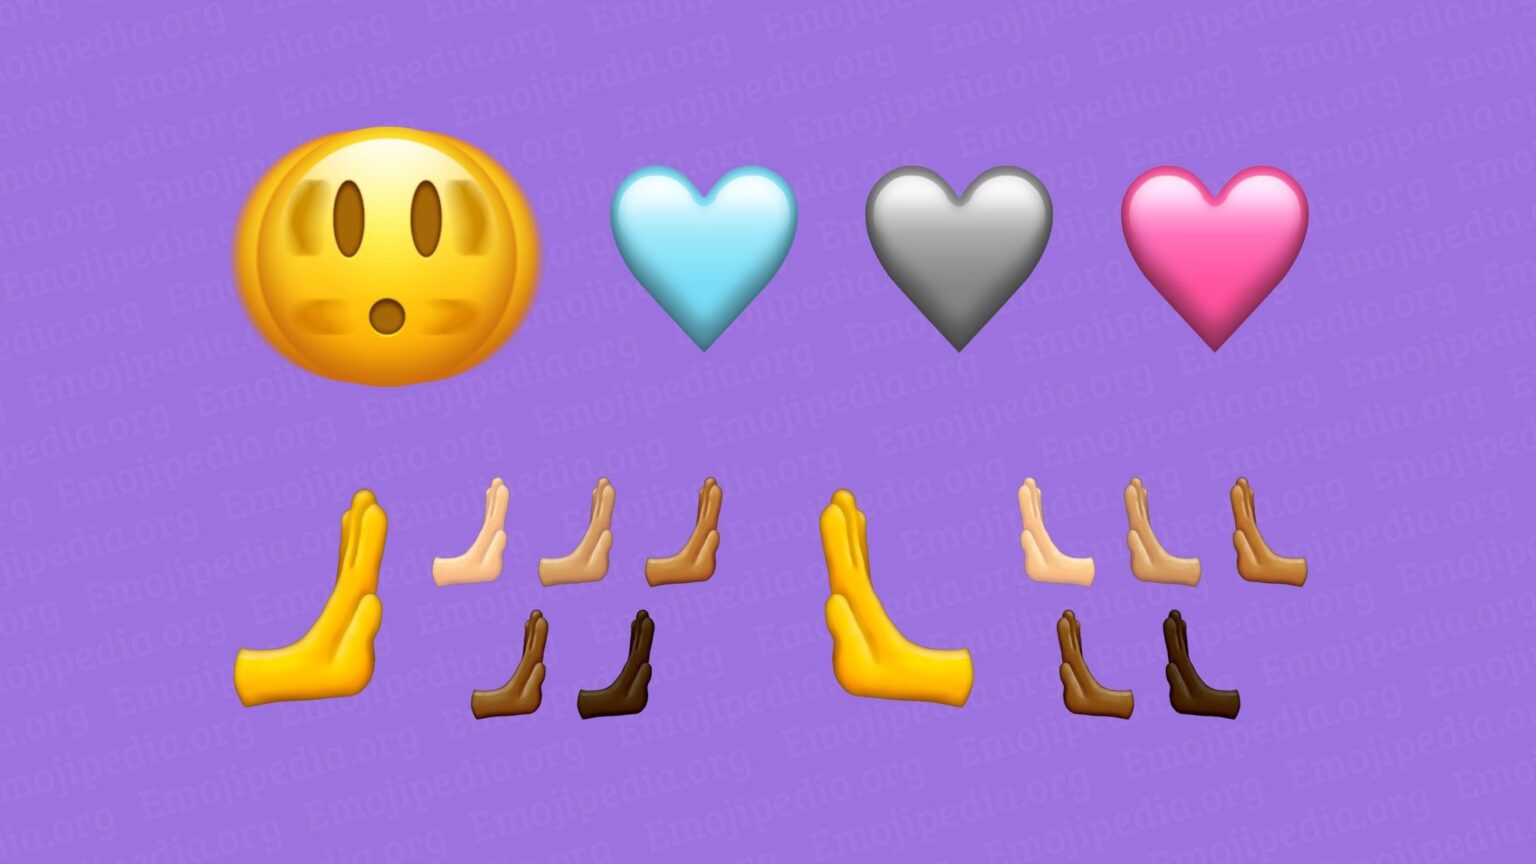 Proposed new emoji list shows we already have all the emoji we need